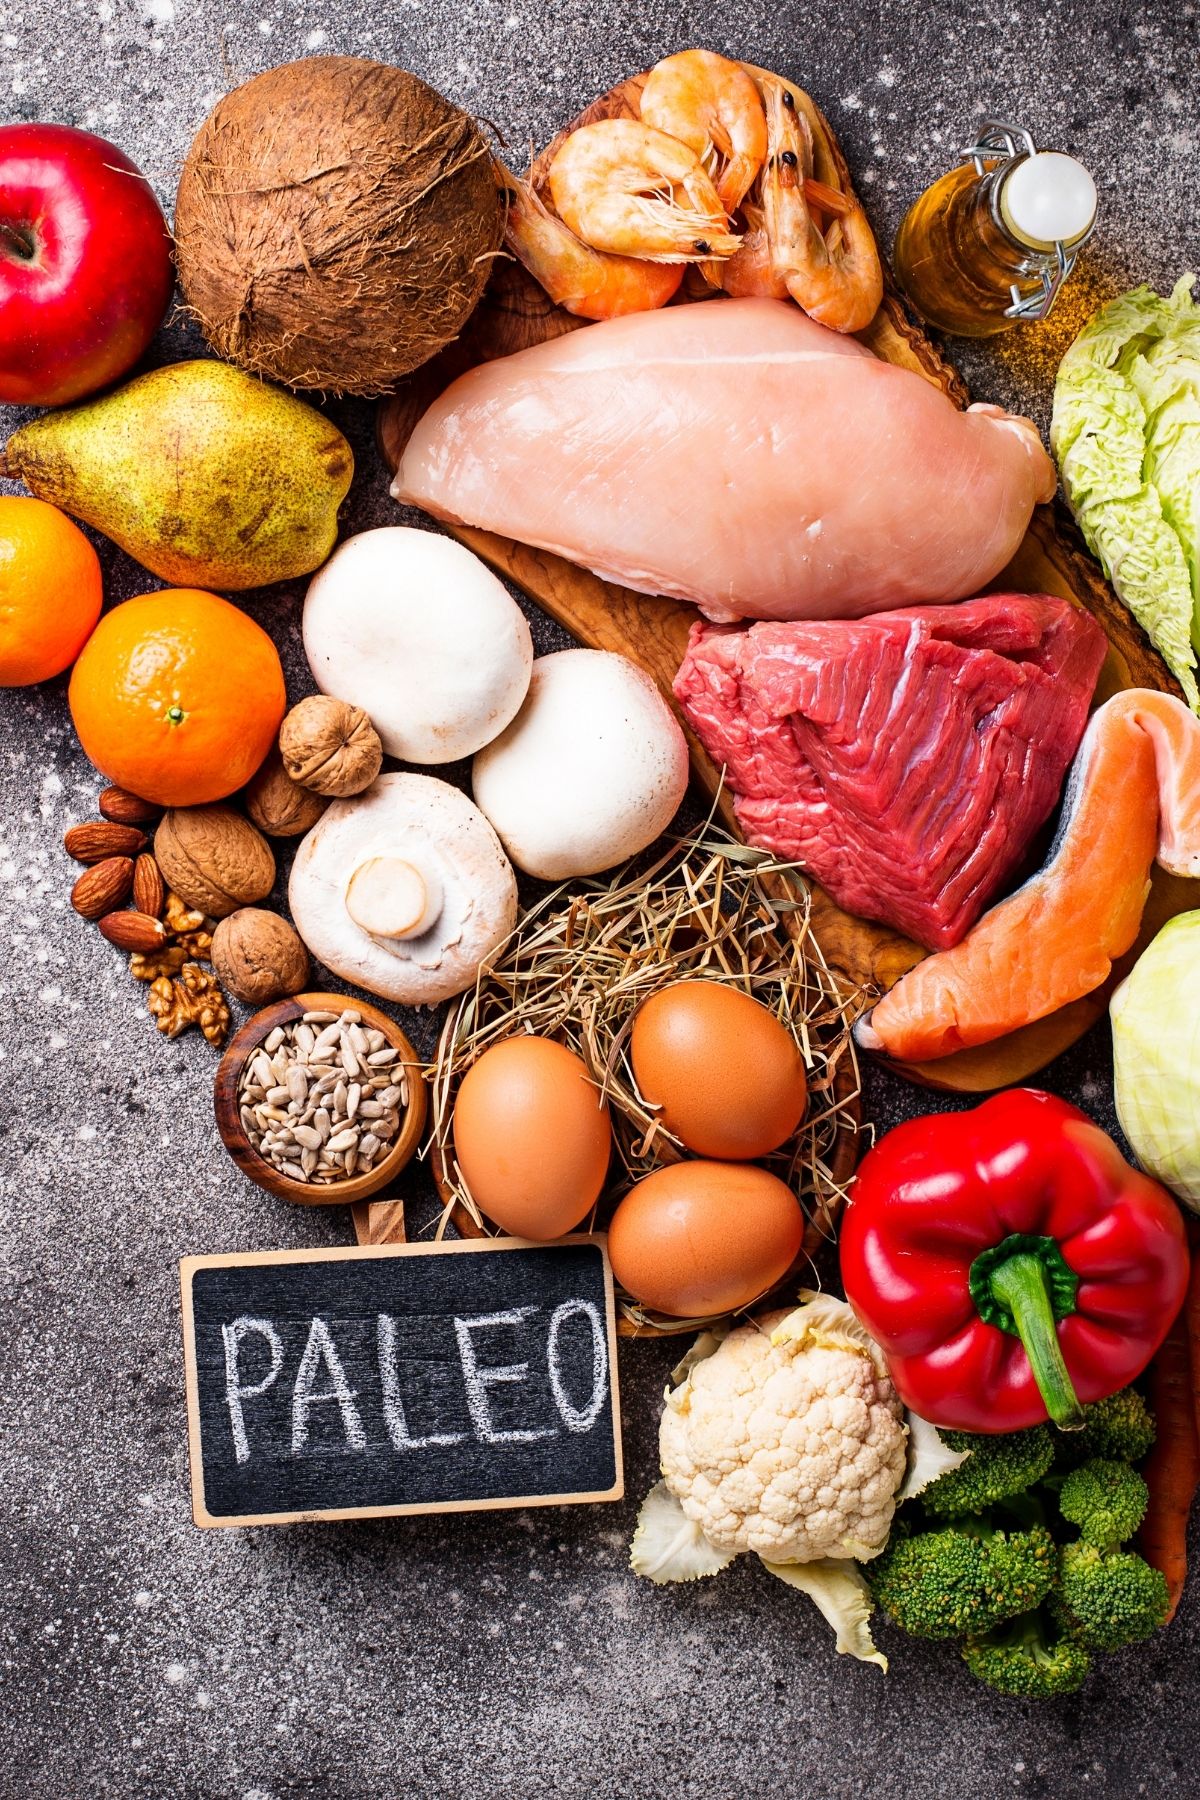 paleo diet foods on a table including meats, vegetables, fish, and eggs.